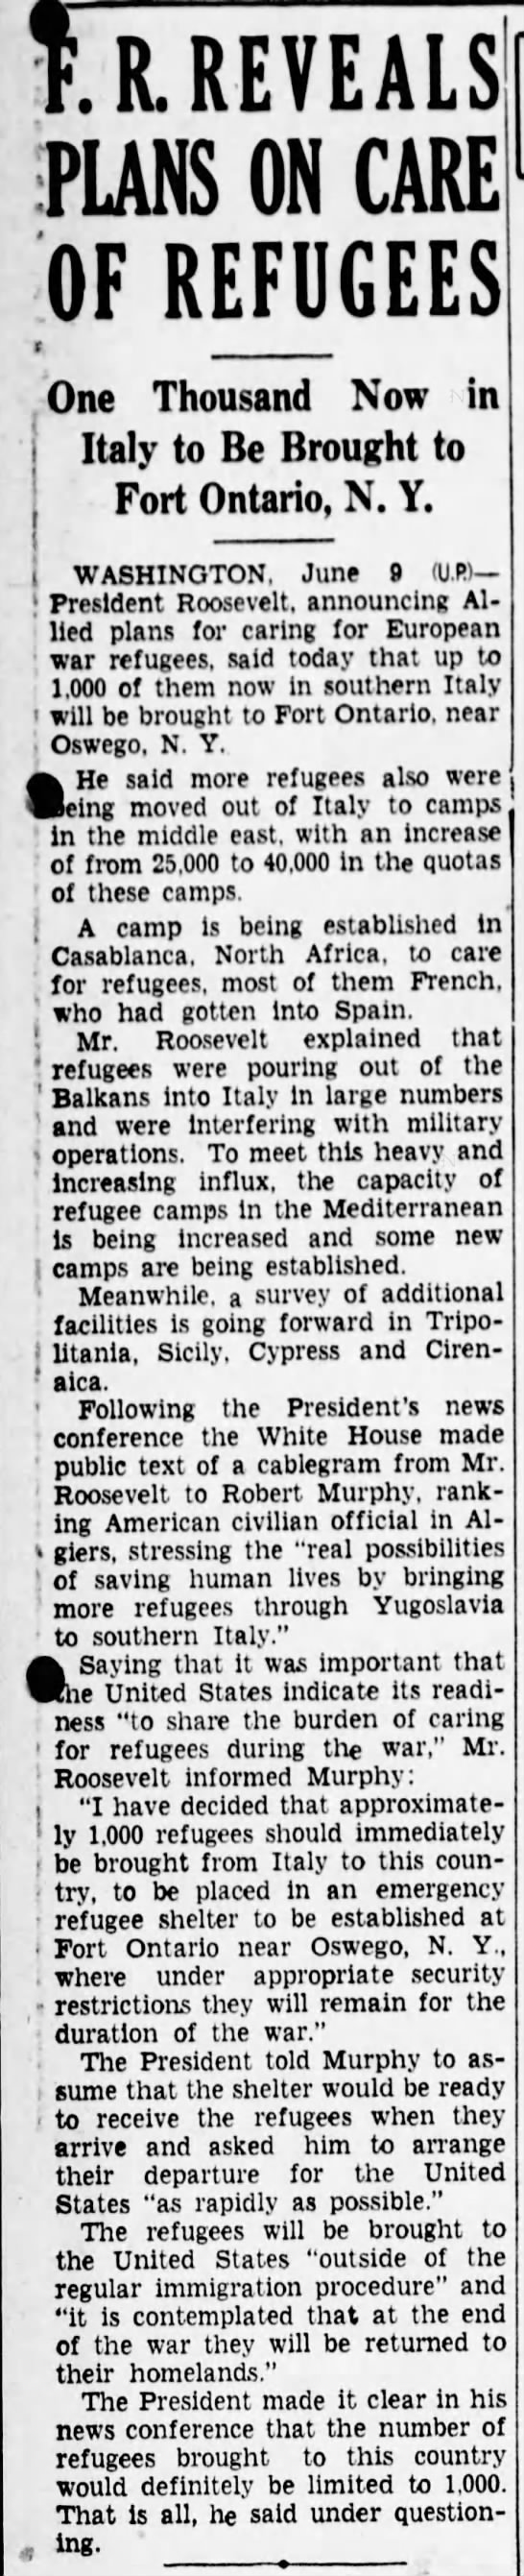 F.R. Reveals Plans on Care of Refugees (6/9/44) - 